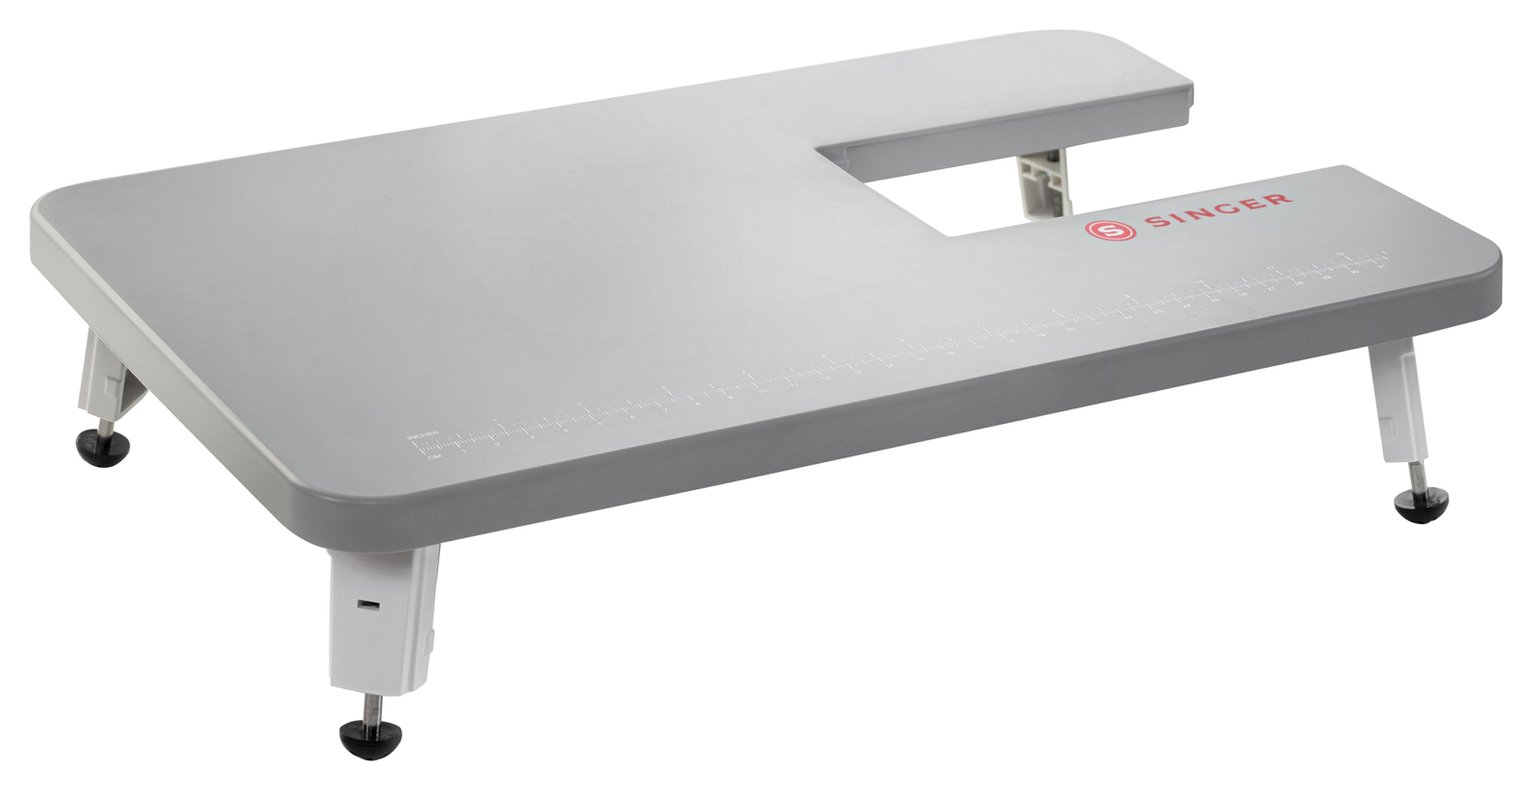 Singer Large Mechanical Extension Sewing Table